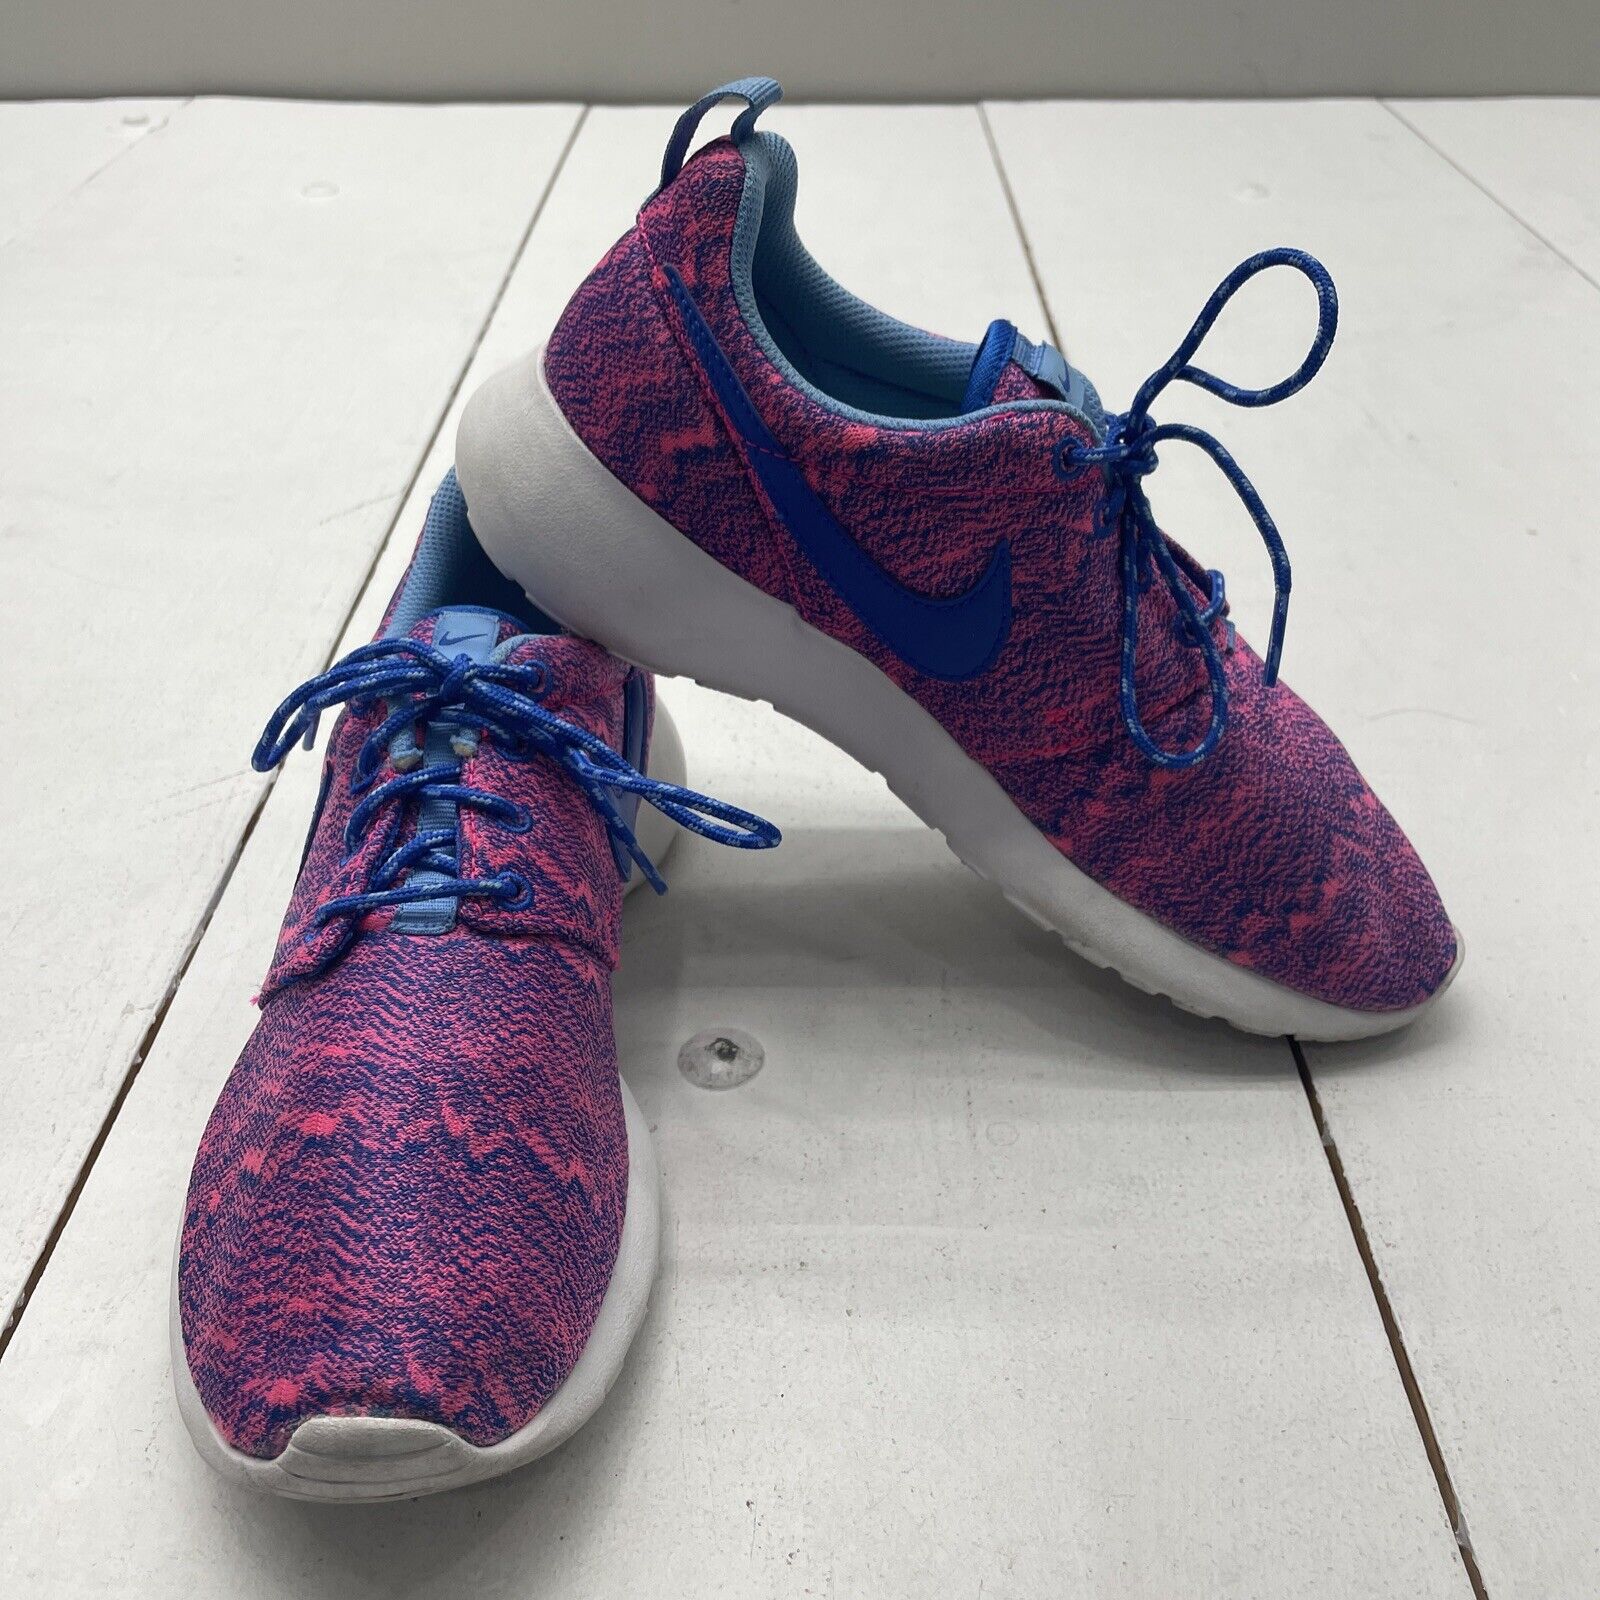 Nike Pink Blue Roshe Run GS Running Shoes Sneakers 677784-600 Girls Size 7Y